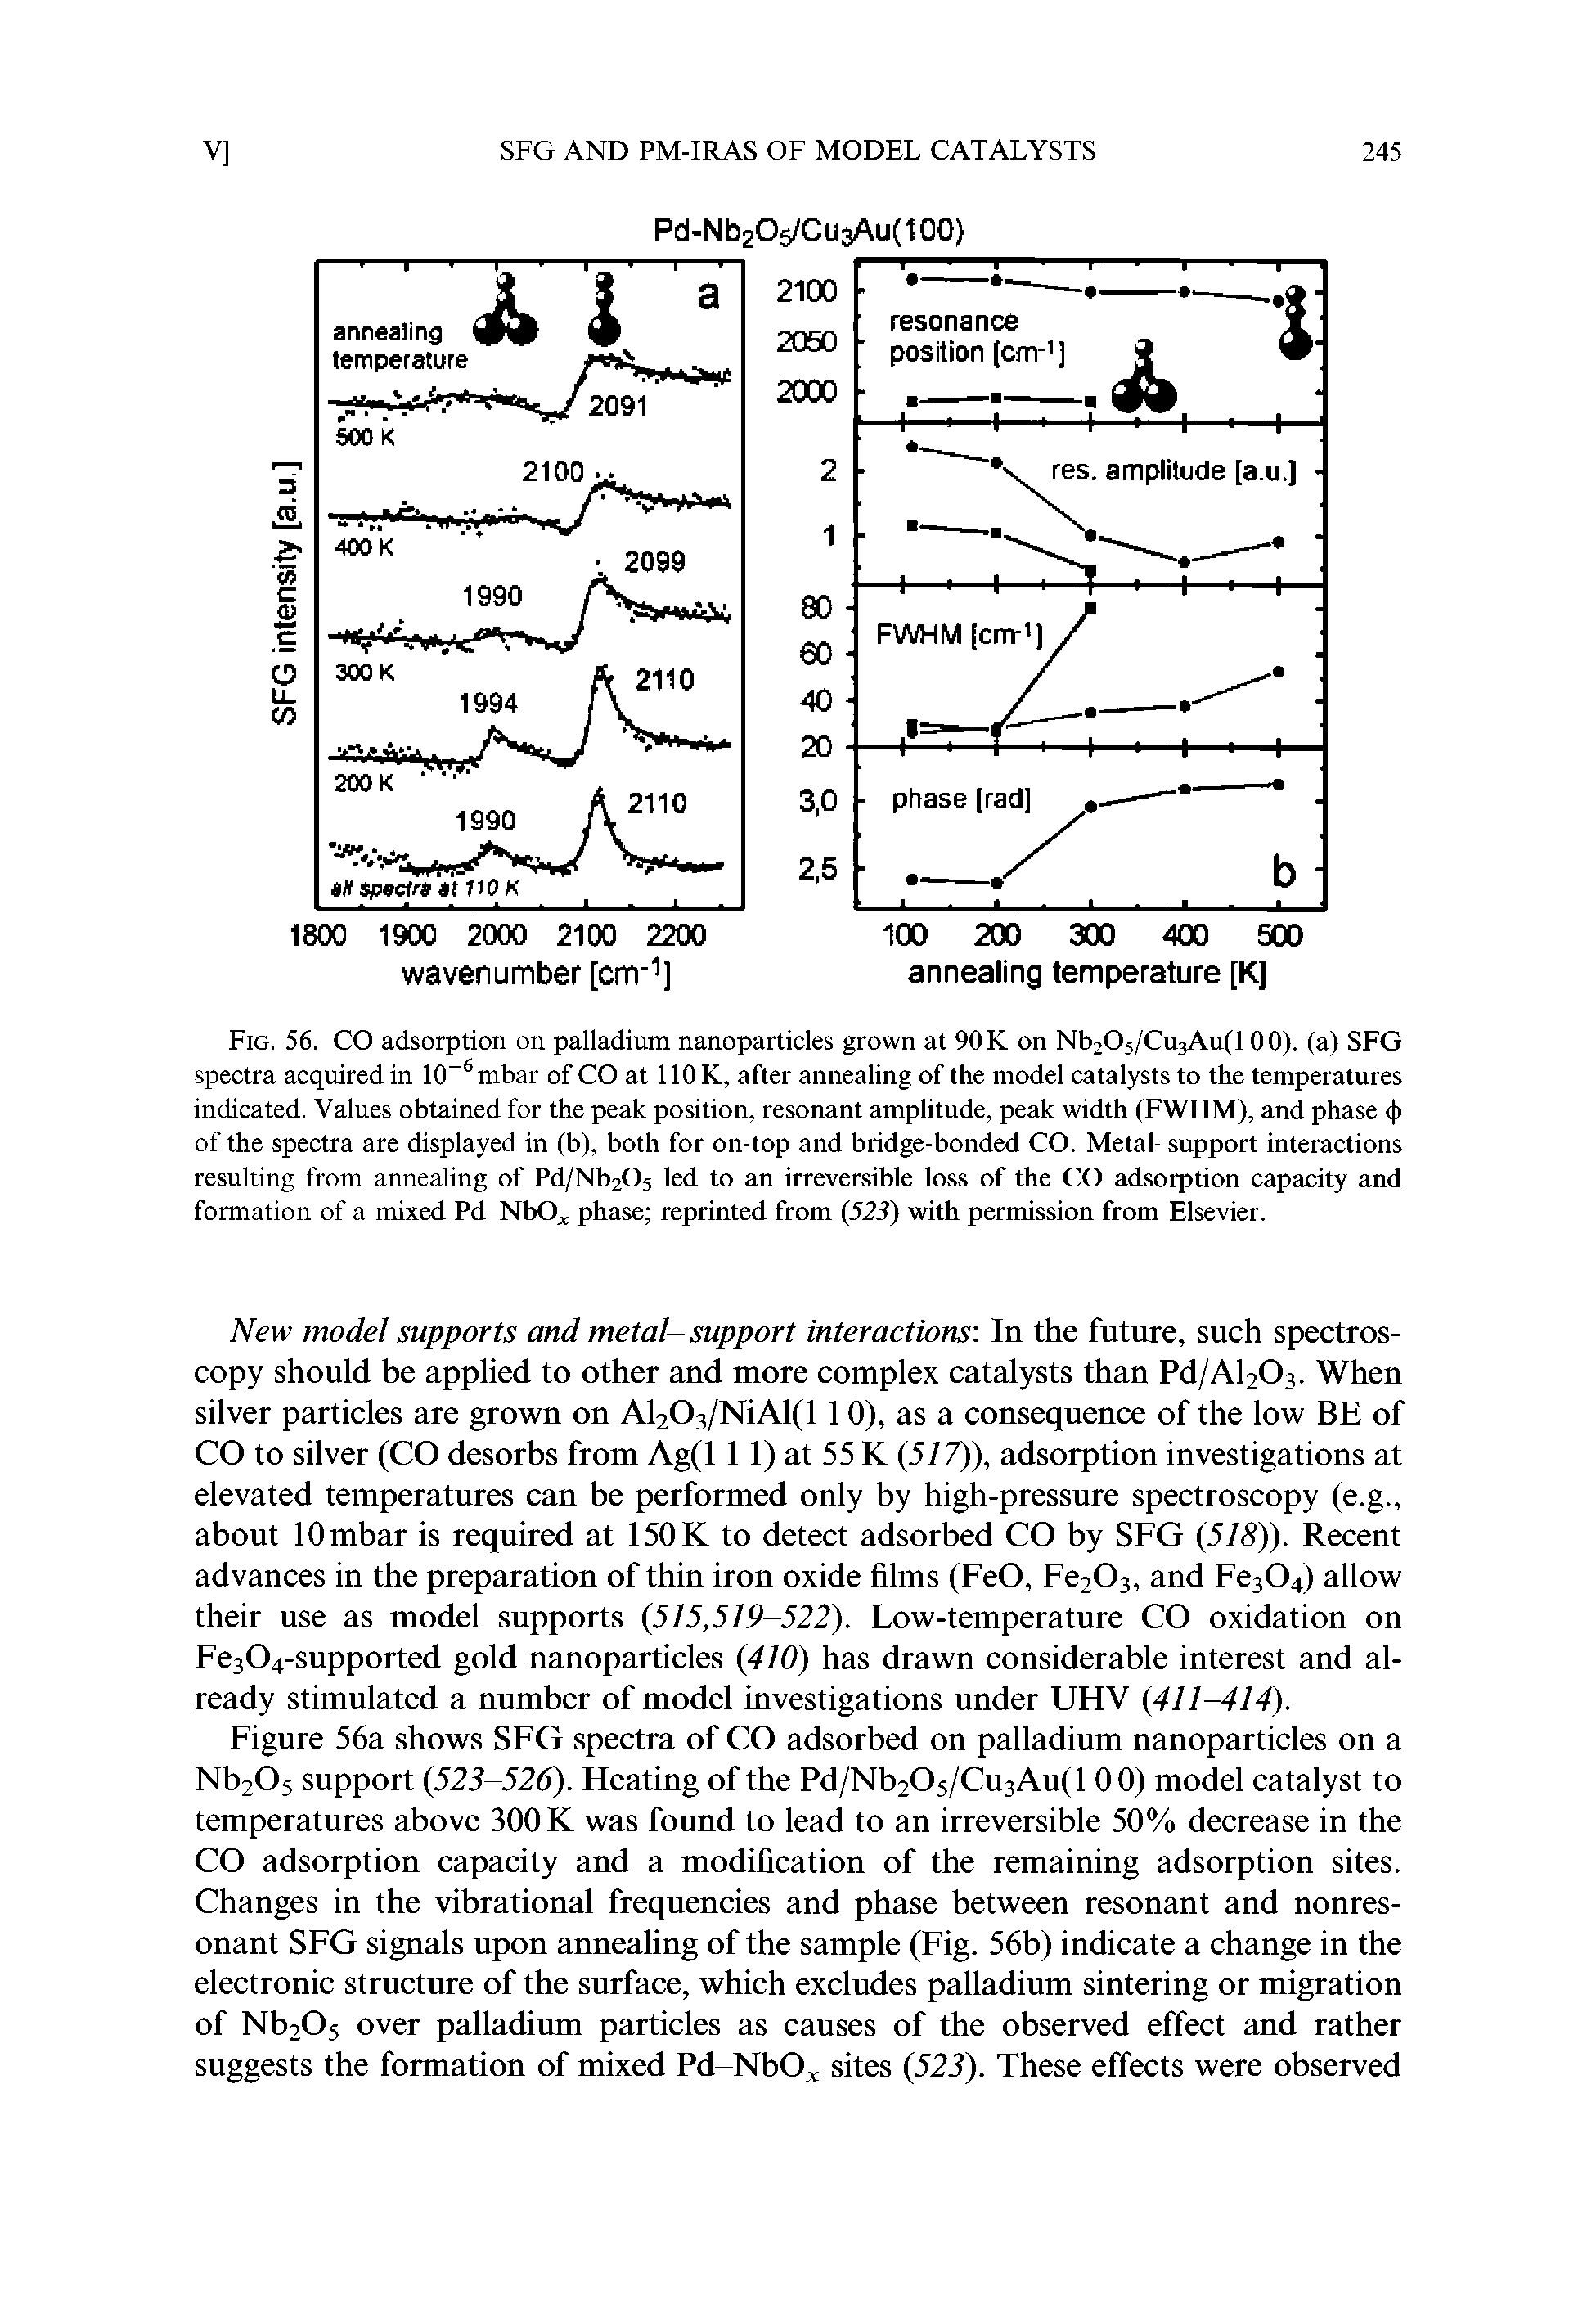 Fig. 56. CO adsorption on palladium nanoparticles grown at 90 K on Nb205/Cu3Au(l 00). (a) SFG spectra acquired in 10 mbar of CO at 110 K, after annealing of the model catalysts to the temperatures indicated. Values obtained for the peak position, resonant amplitude, peak width (FWHM), and phase <[) of the spectra are displayed in (b), both for on-top and bridge-bonded CO. Metal-support interactions resulting from annealing of Pd/Nb205 led to an irreversible loss of the CO adsorption capacity and formation of a mixed Pd-NbO, . phase reprinted from (523) with permission from Elsevier.